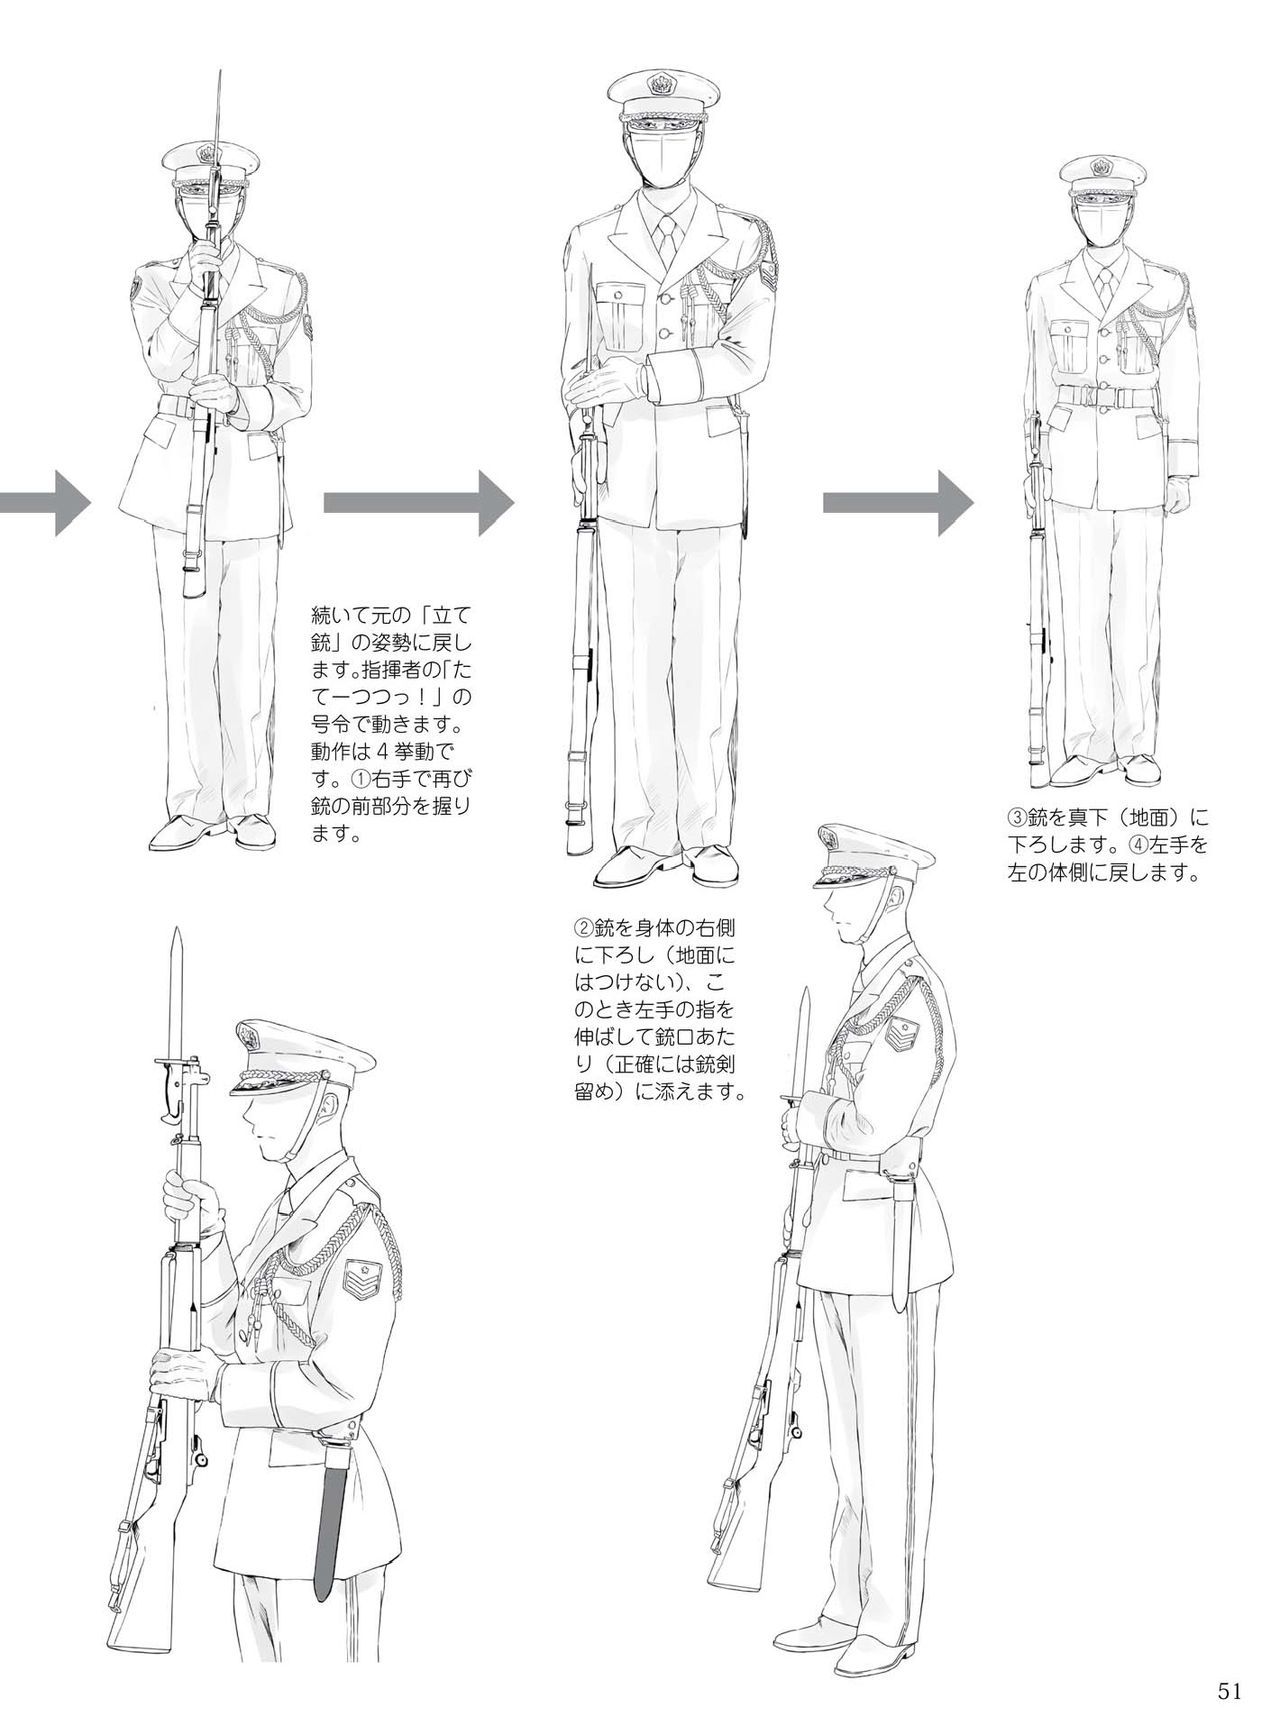 How to draw military uniforms and uniforms From Self-Defense Forces 軍服・制服の描き方 アメリカ軍・自衛隊の制服から戦闘服まで 54